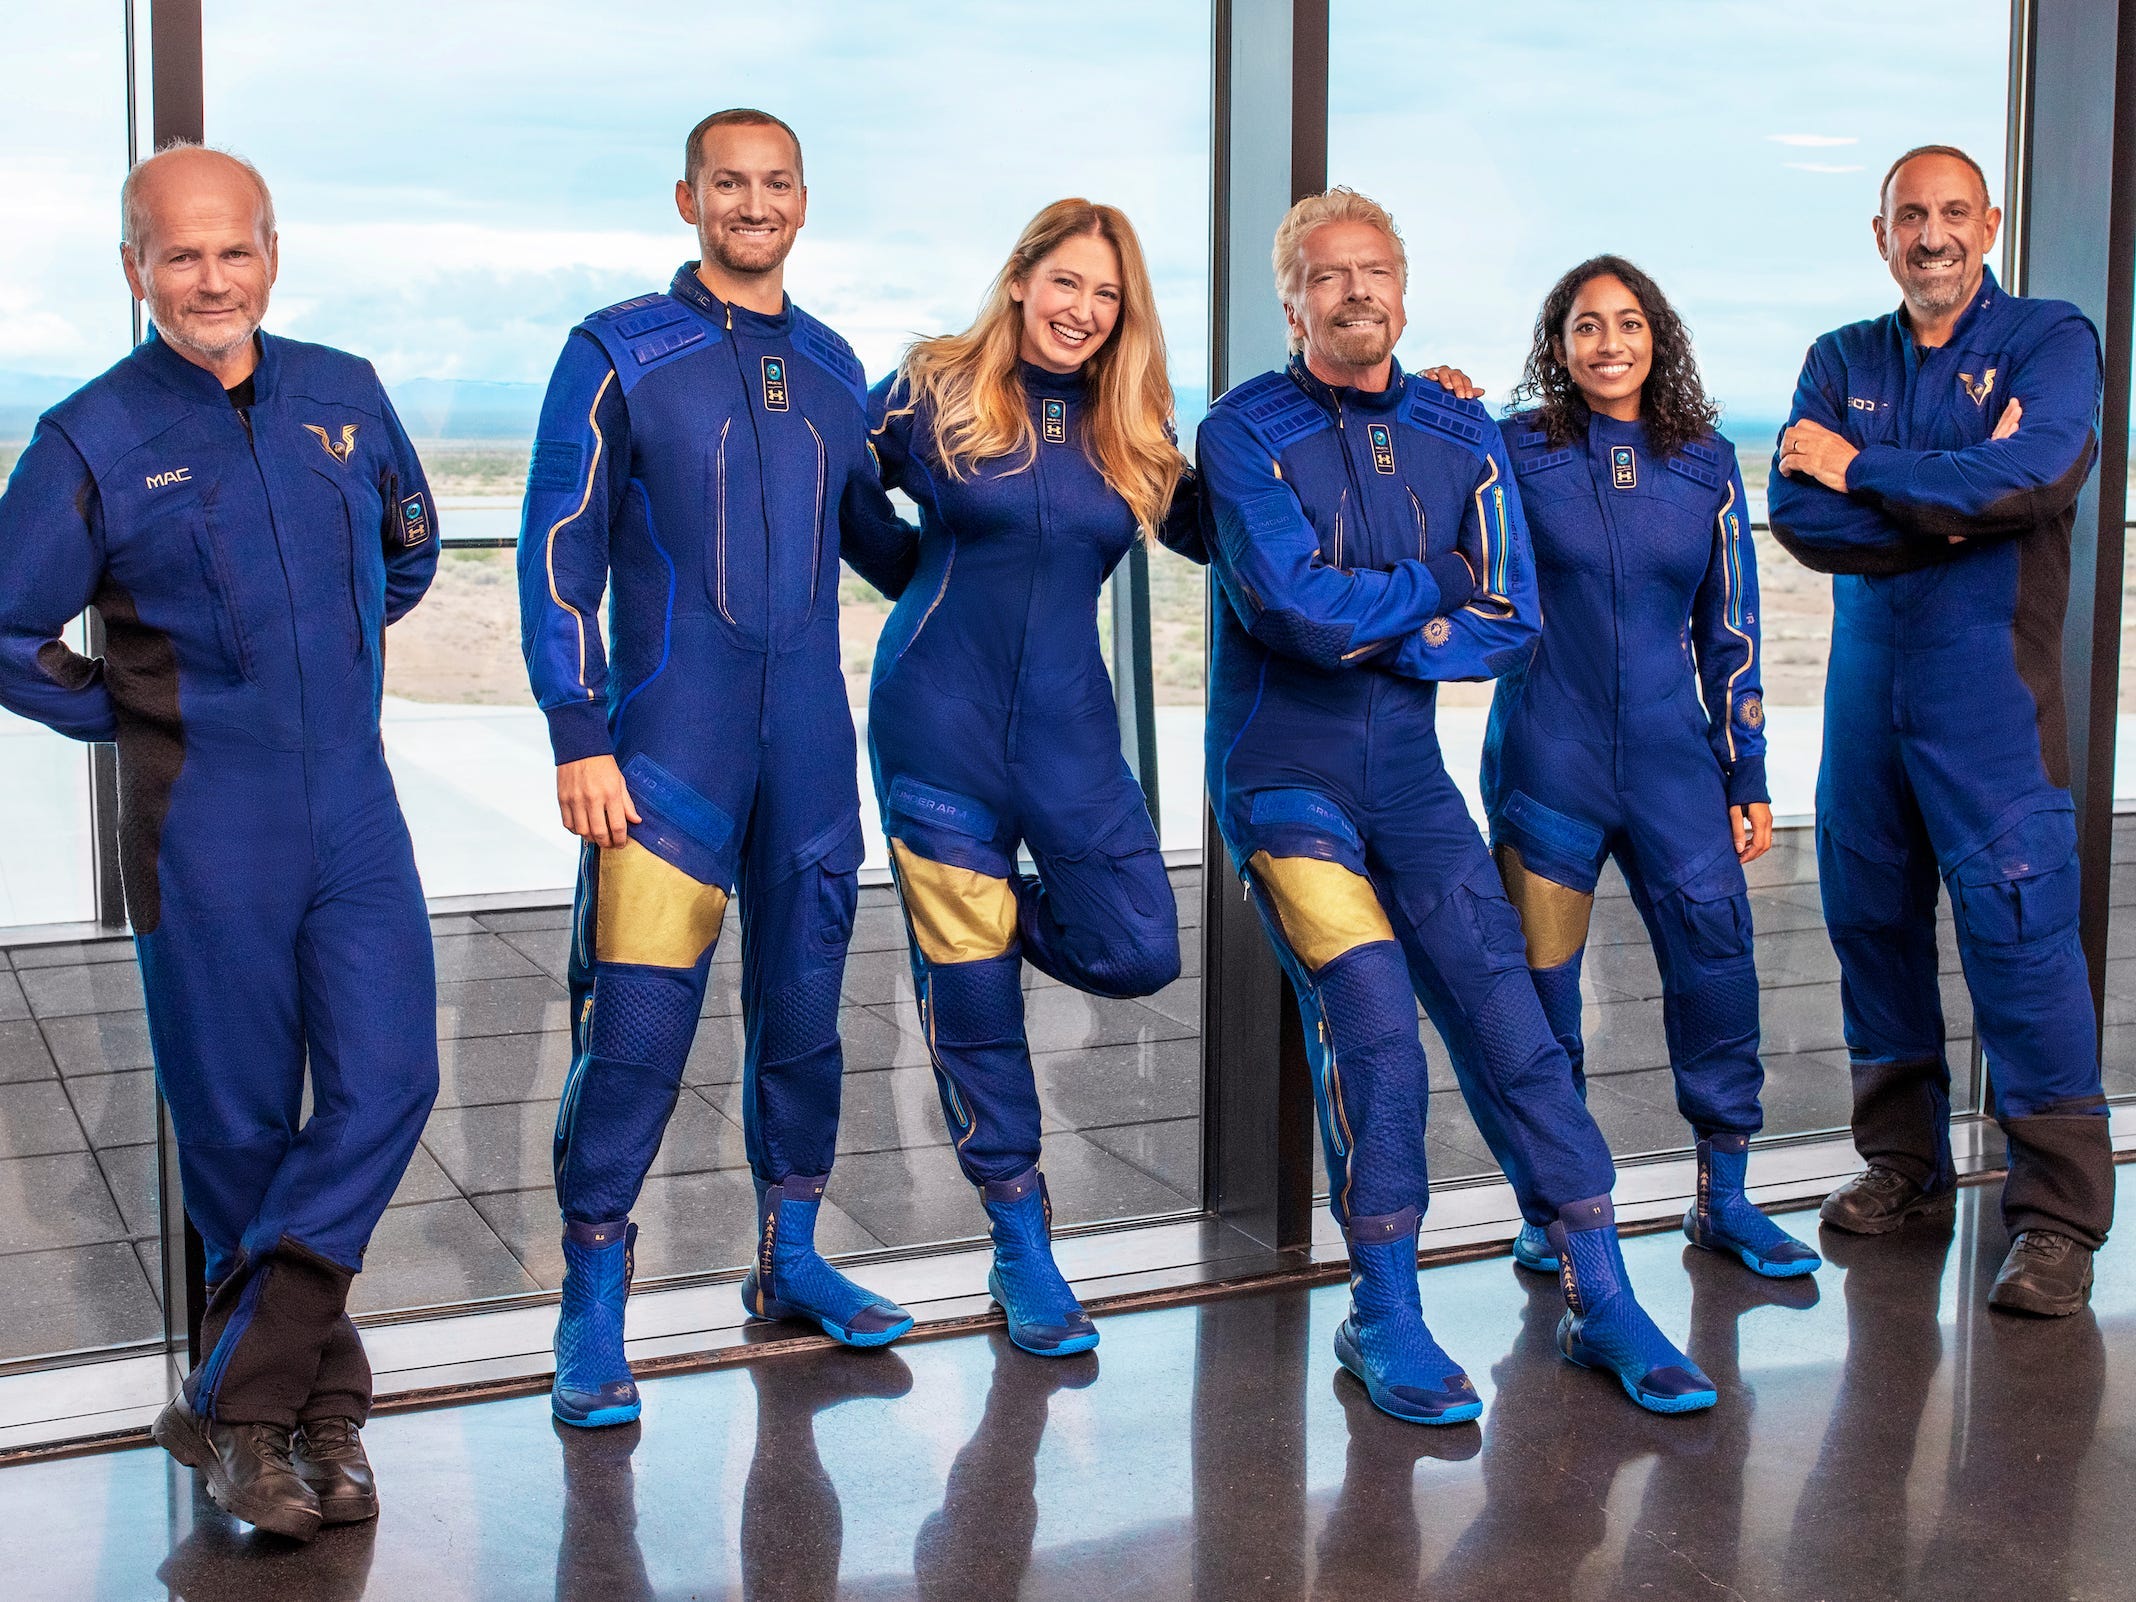 virgin galactic VSS Unity first full crew six people in blue jumpsuits